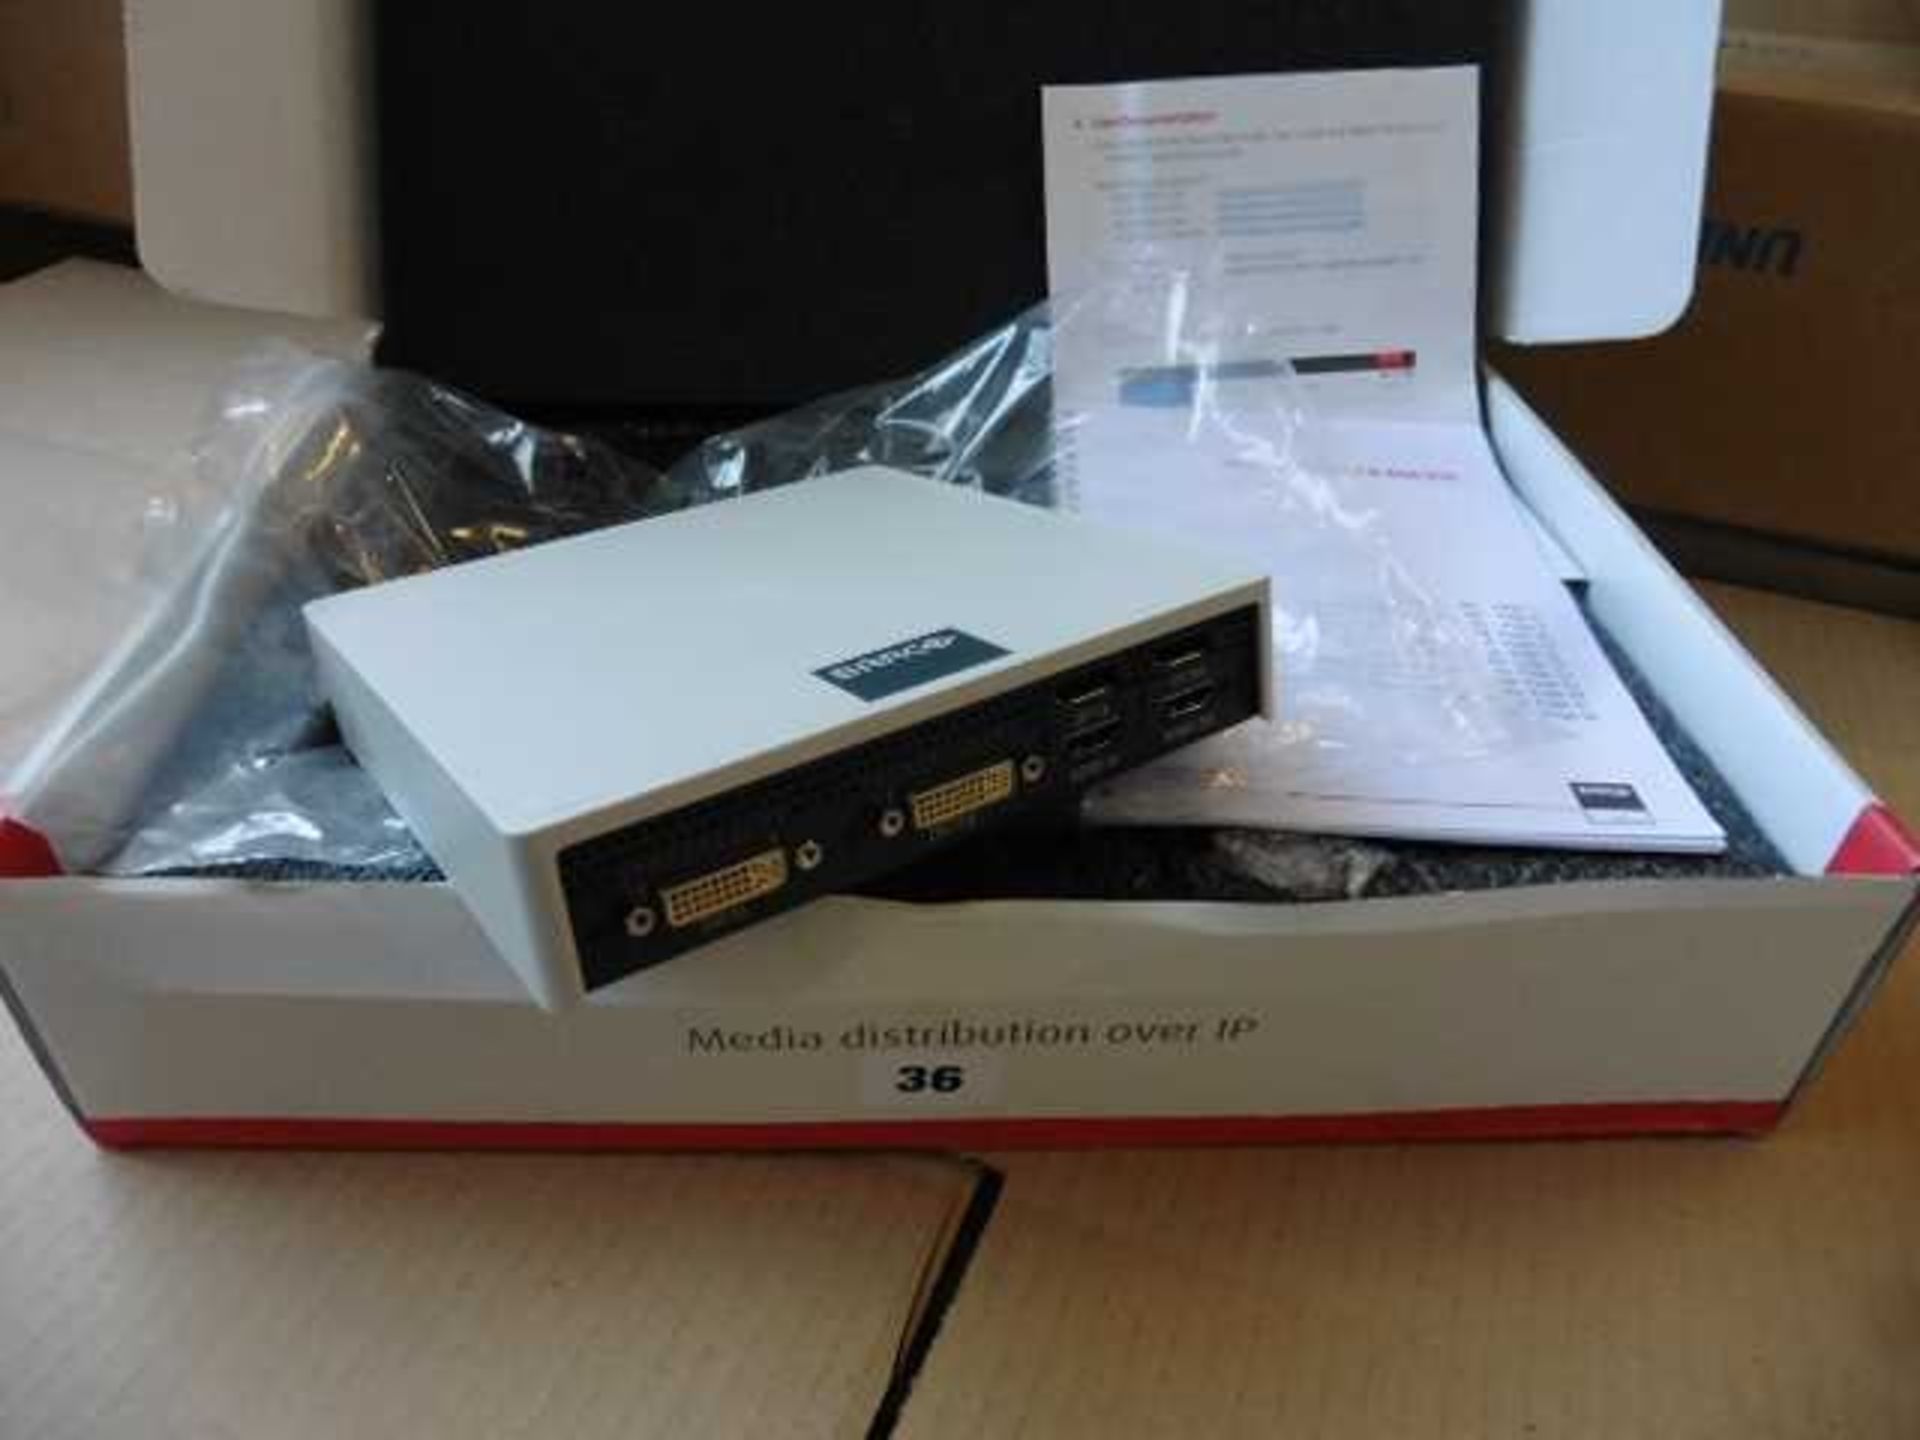 +VAT Barco Media distribution over IP ultra HD encoder/decoder model No NGS-D320 with box - Image 3 of 4